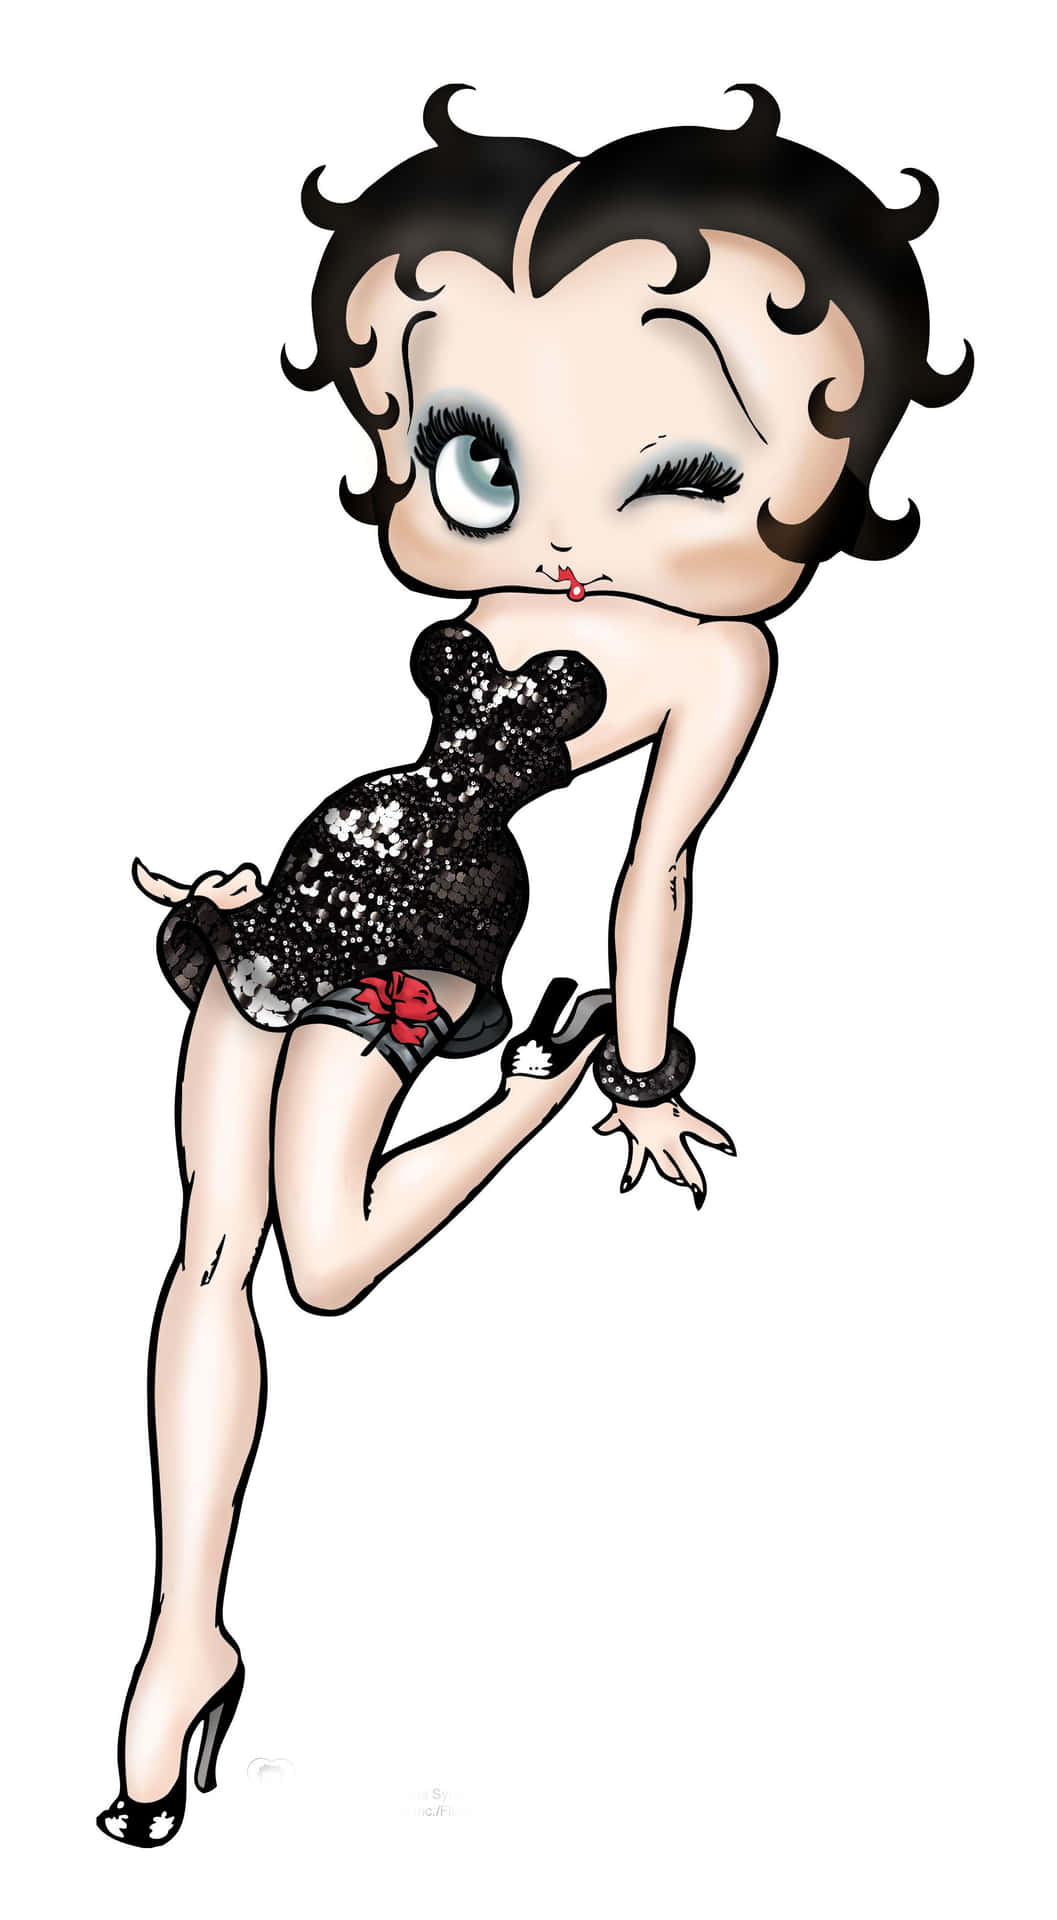 Show your flapper girl side with Betty Boop!